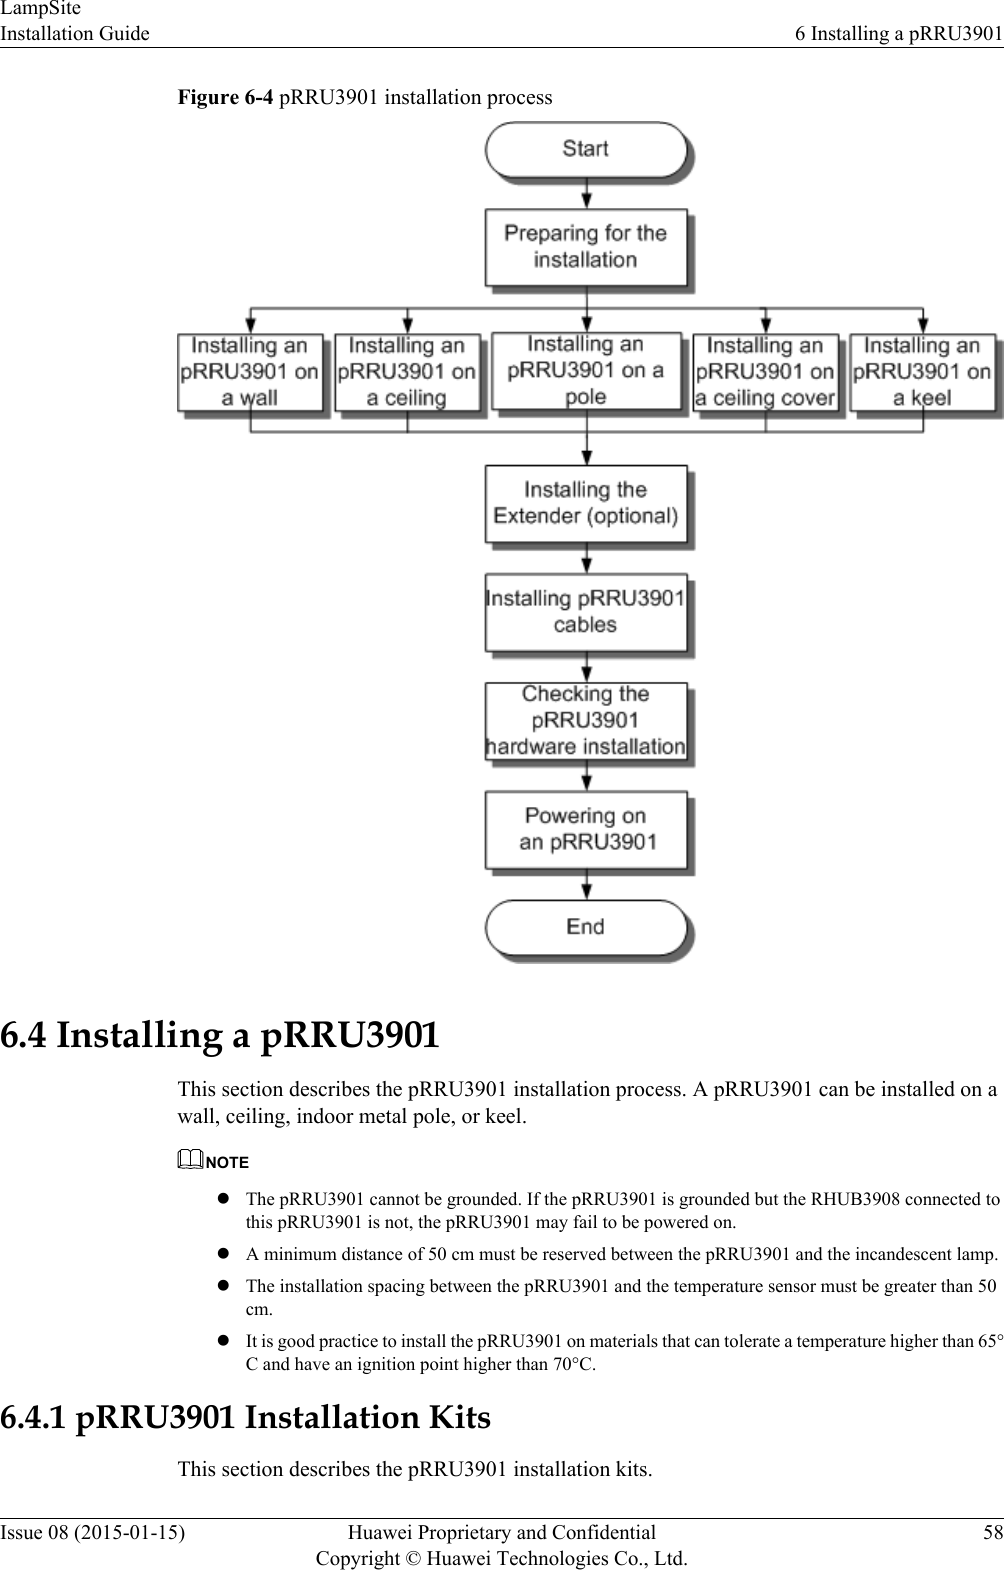 Figure 6-4 pRRU3901 installation process6.4 Installing a pRRU3901This section describes the pRRU3901 installation process. A pRRU3901 can be installed on awall, ceiling, indoor metal pole, or keel.NOTElThe pRRU3901 cannot be grounded. If the pRRU3901 is grounded but the RHUB3908 connected tothis pRRU3901 is not, the pRRU3901 may fail to be powered on.lA minimum distance of 50 cm must be reserved between the pRRU3901 and the incandescent lamp.lThe installation spacing between the pRRU3901 and the temperature sensor must be greater than 50cm.lIt is good practice to install the pRRU3901 on materials that can tolerate a temperature higher than 65°C and have an ignition point higher than 70°C.6.4.1 pRRU3901 Installation KitsThis section describes the pRRU3901 installation kits.LampSiteInstallation Guide 6 Installing a pRRU3901Issue 08 (2015-01-15) Huawei Proprietary and ConfidentialCopyright © Huawei Technologies Co., Ltd.58